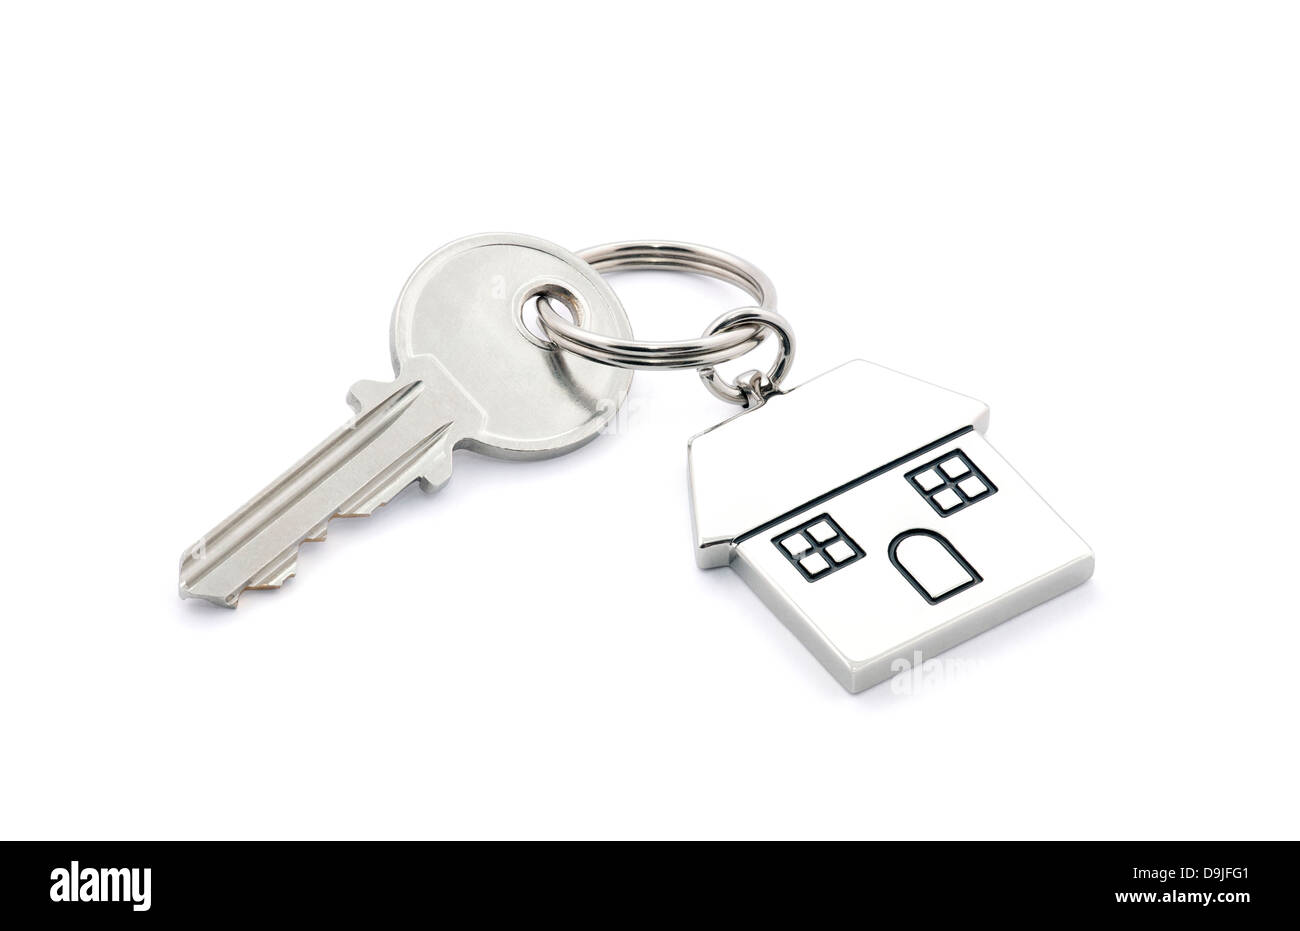 House key with clipping path Stock Photo